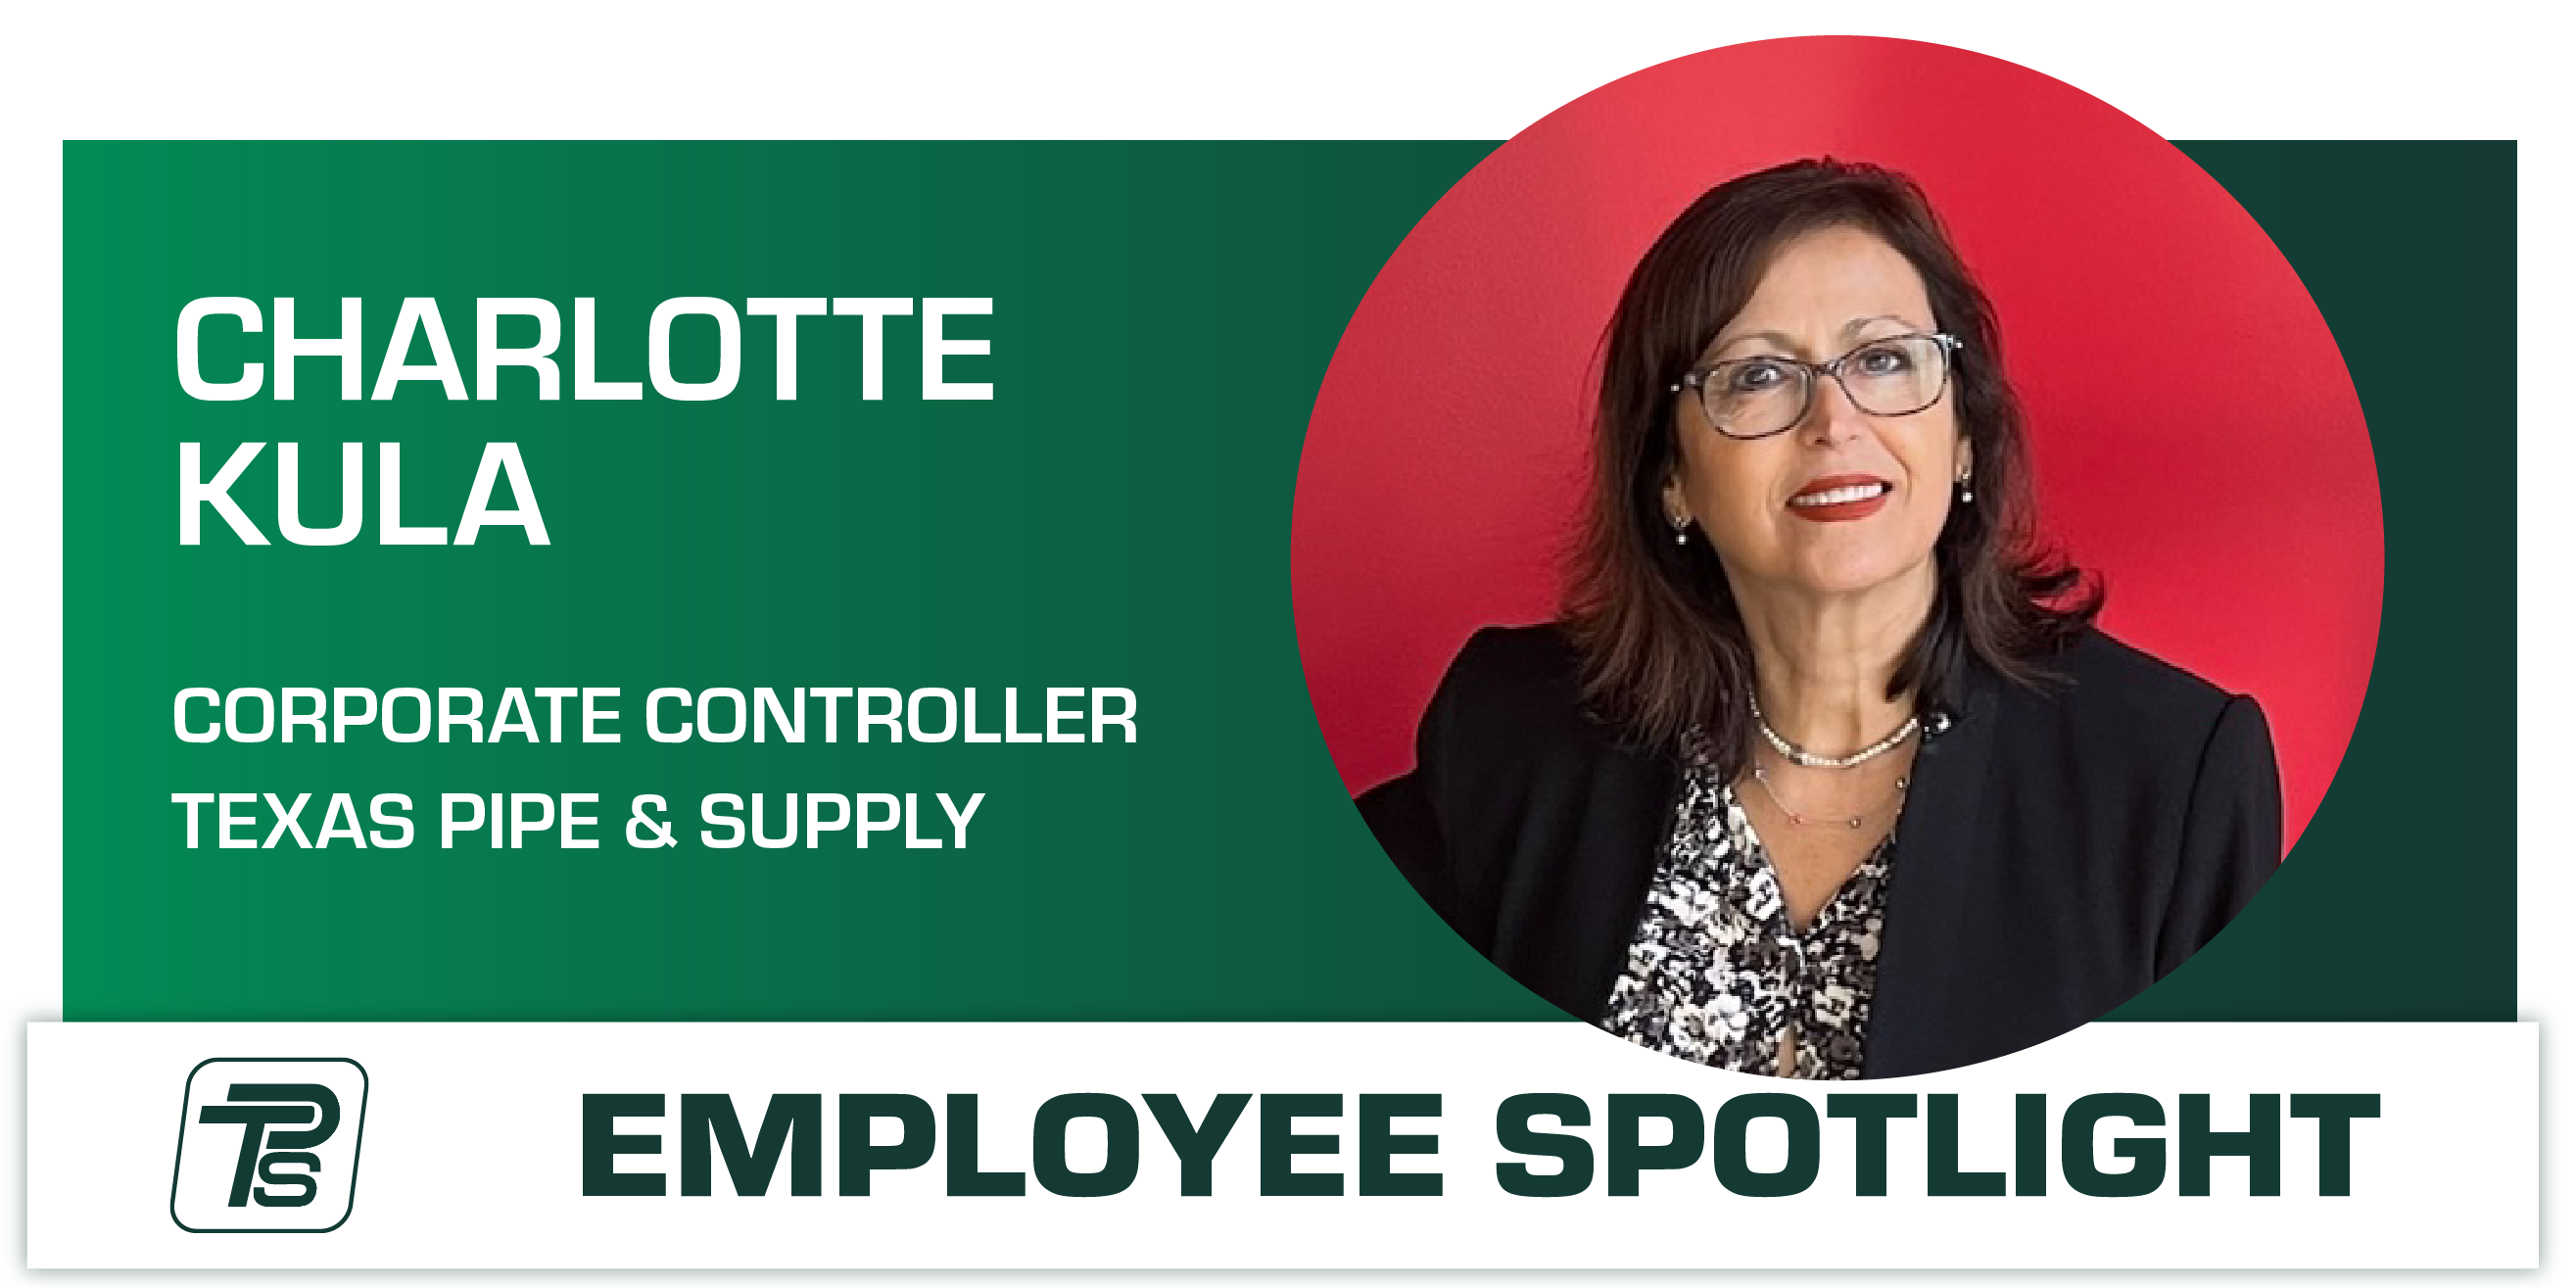 Charlotte Kula, Corporate Controller at Texas Pipe Family of Companies.